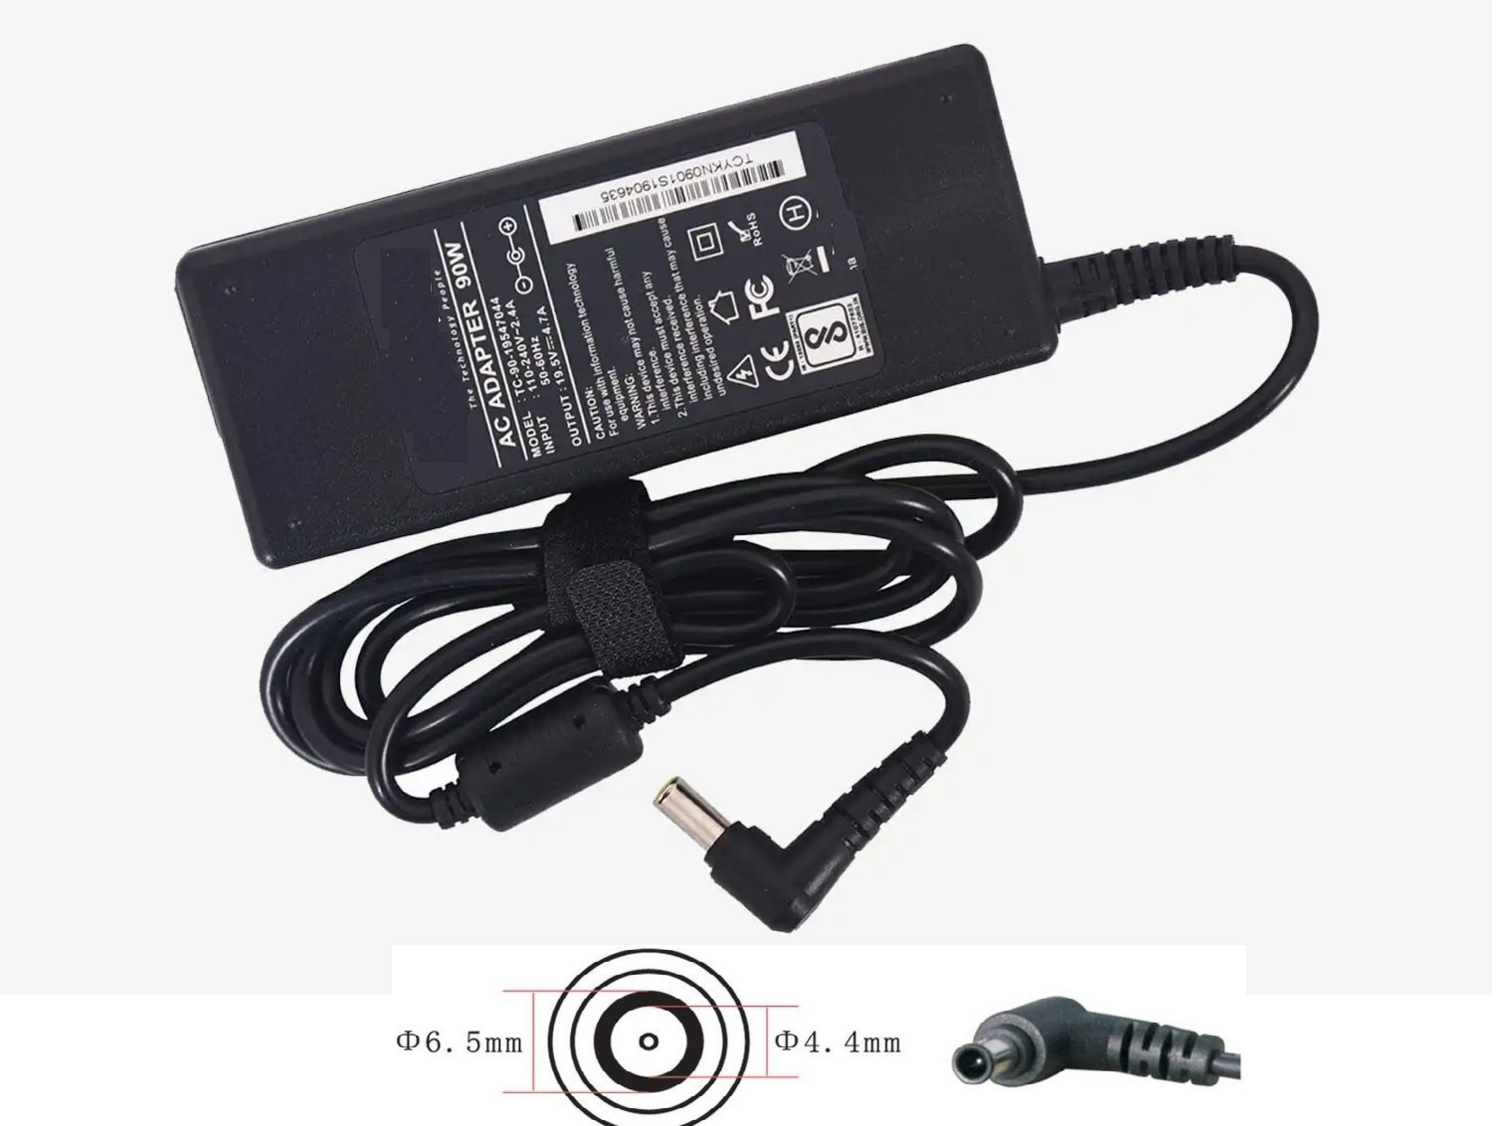 sony vaio SA series SB series SE series Z series Compatible Laptop charger / AC power Adaptor